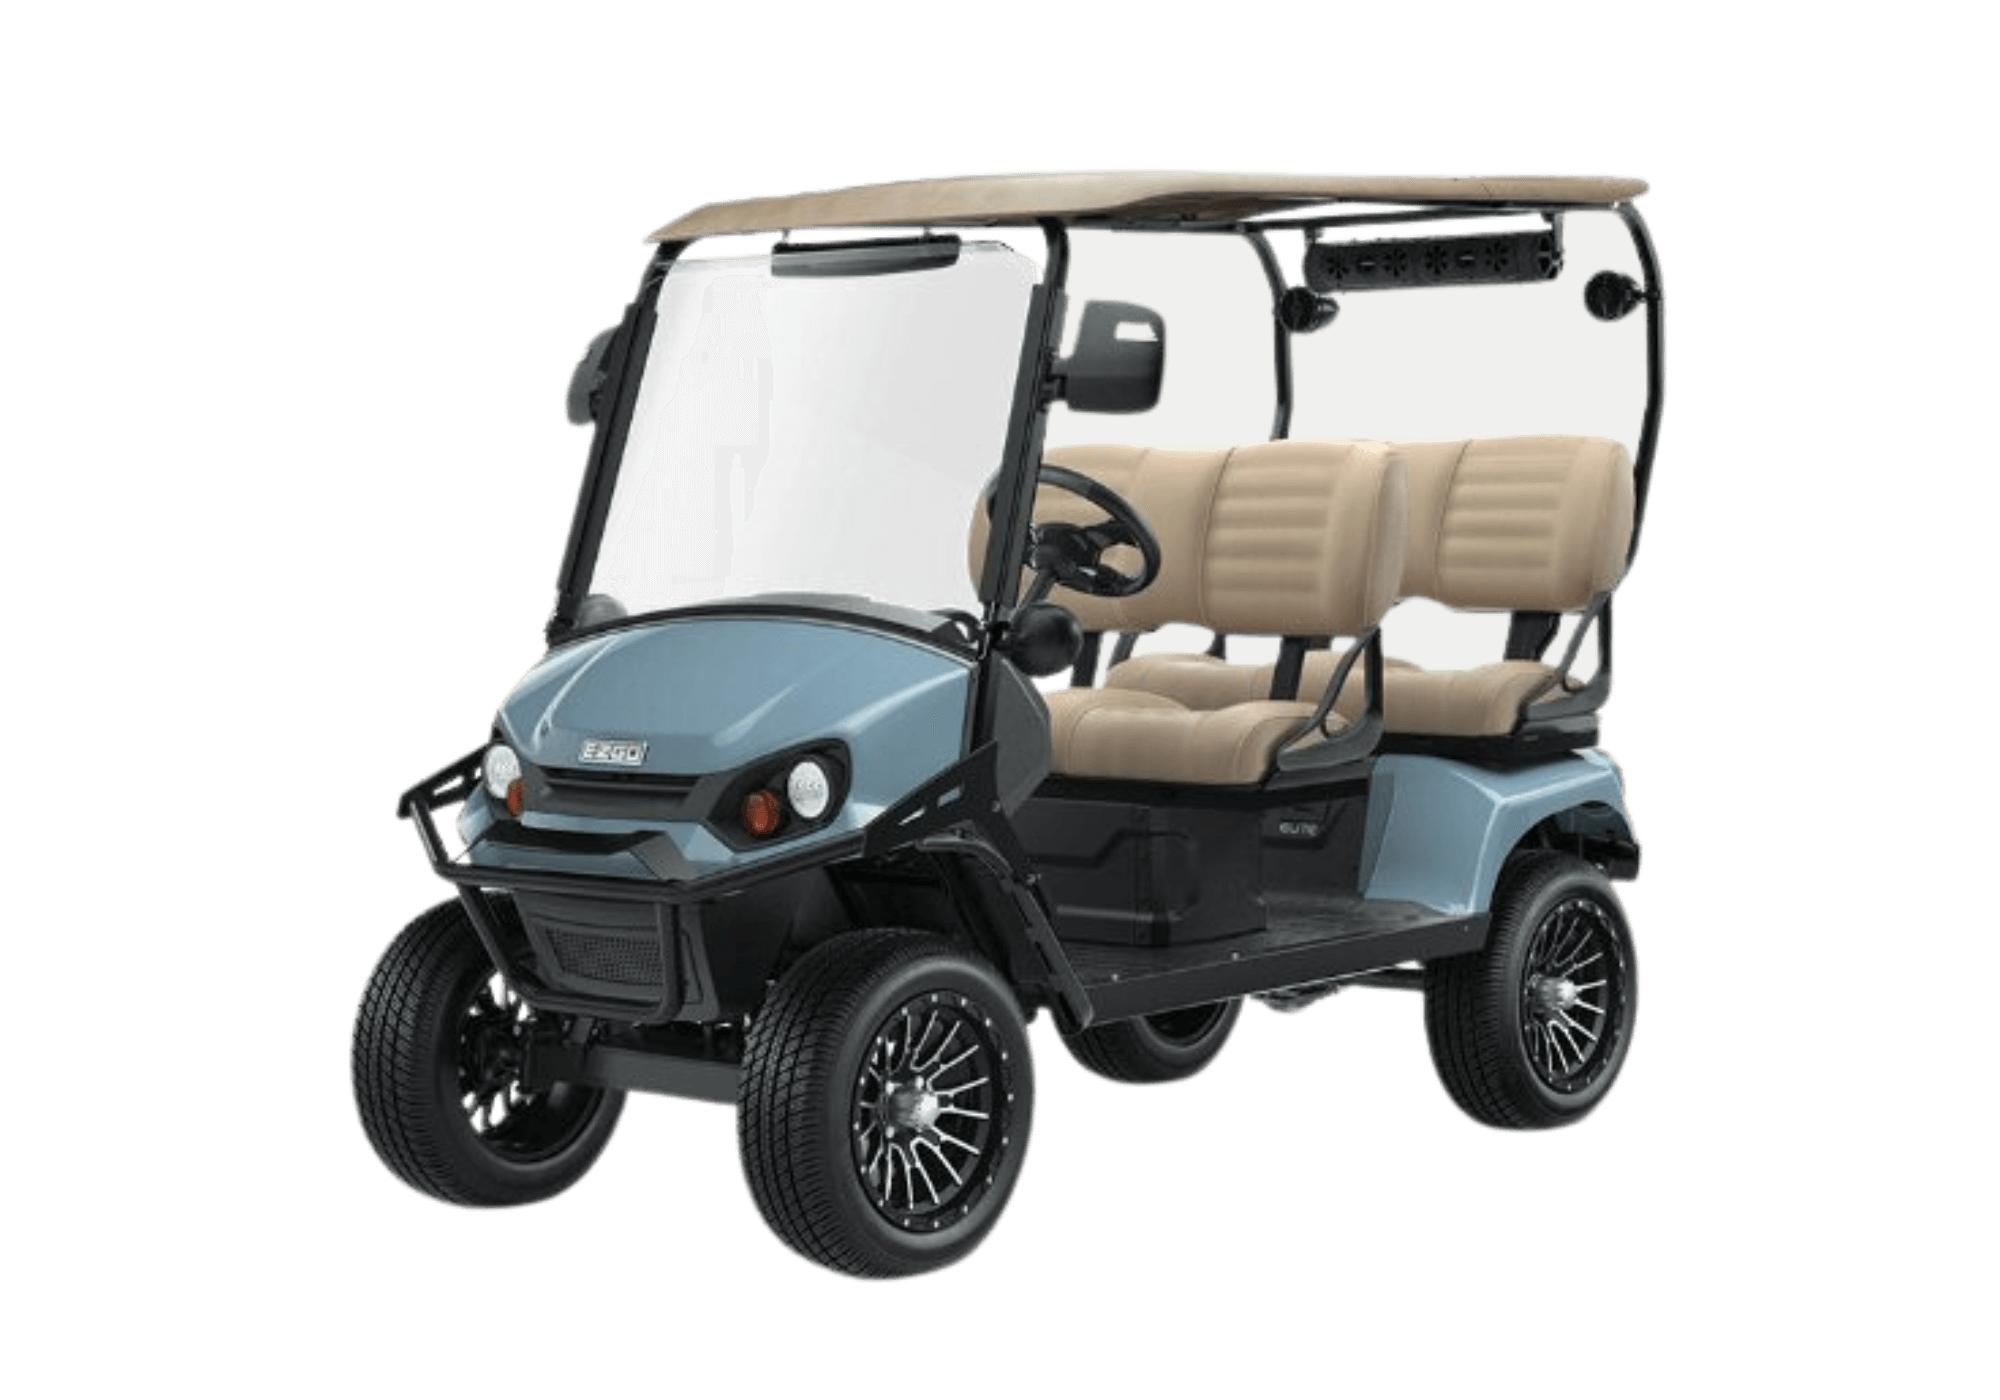 The EZGO Liberty is one of the best golf carts